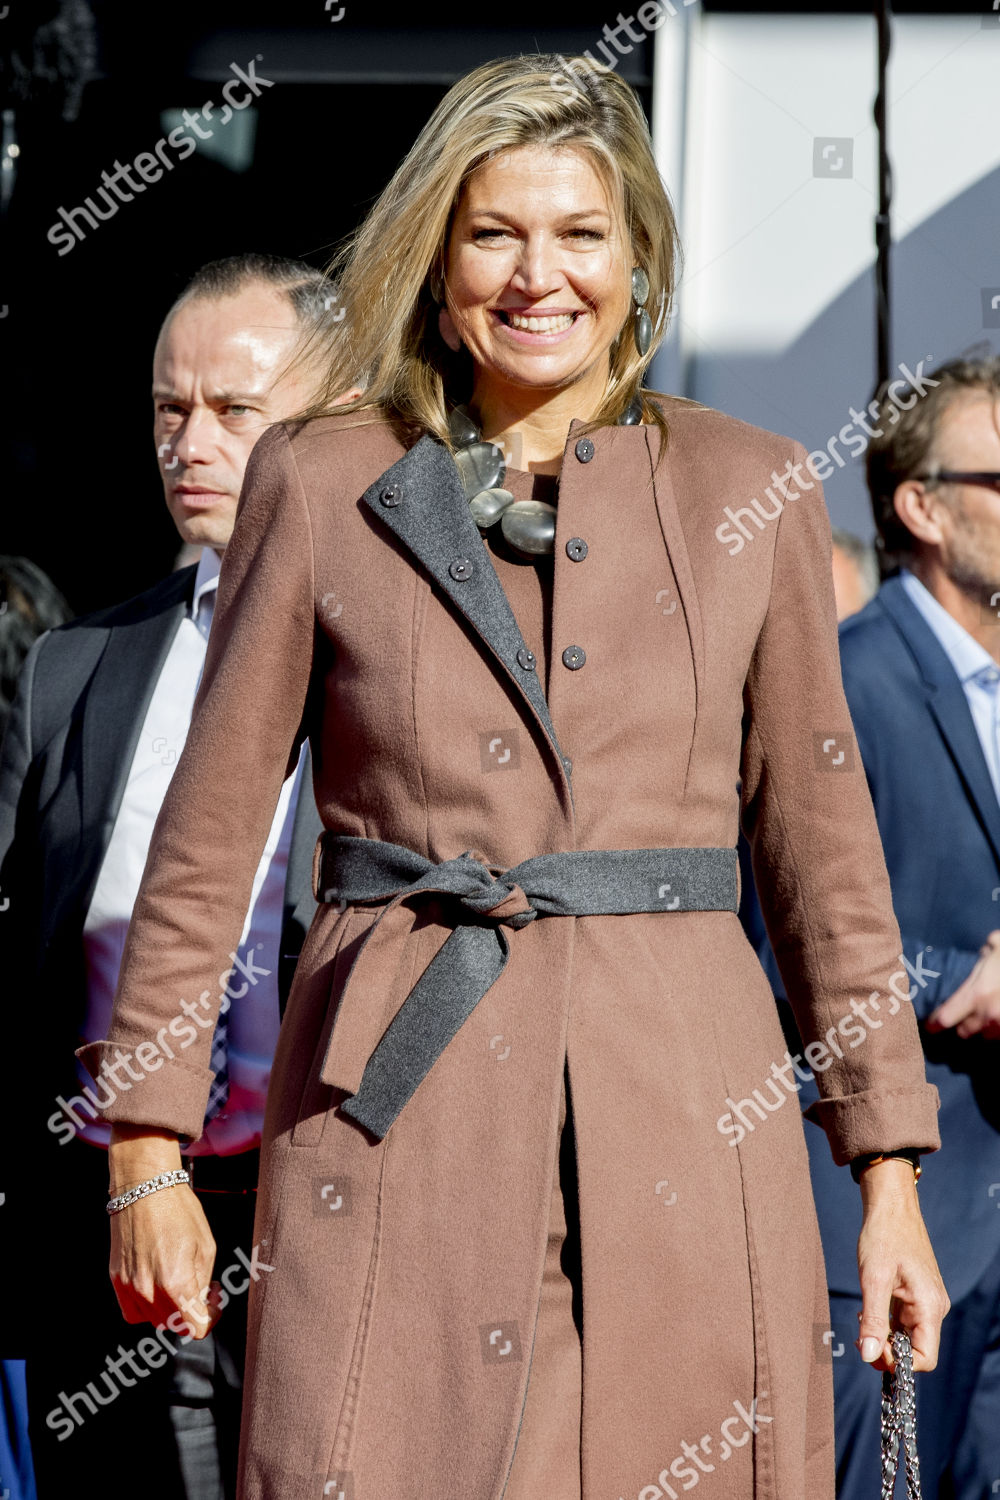 royal-visit-to-113-suicide-prevention-amsterdam-the-netherlands-shutterstock-editorial-9958951ao.jpg